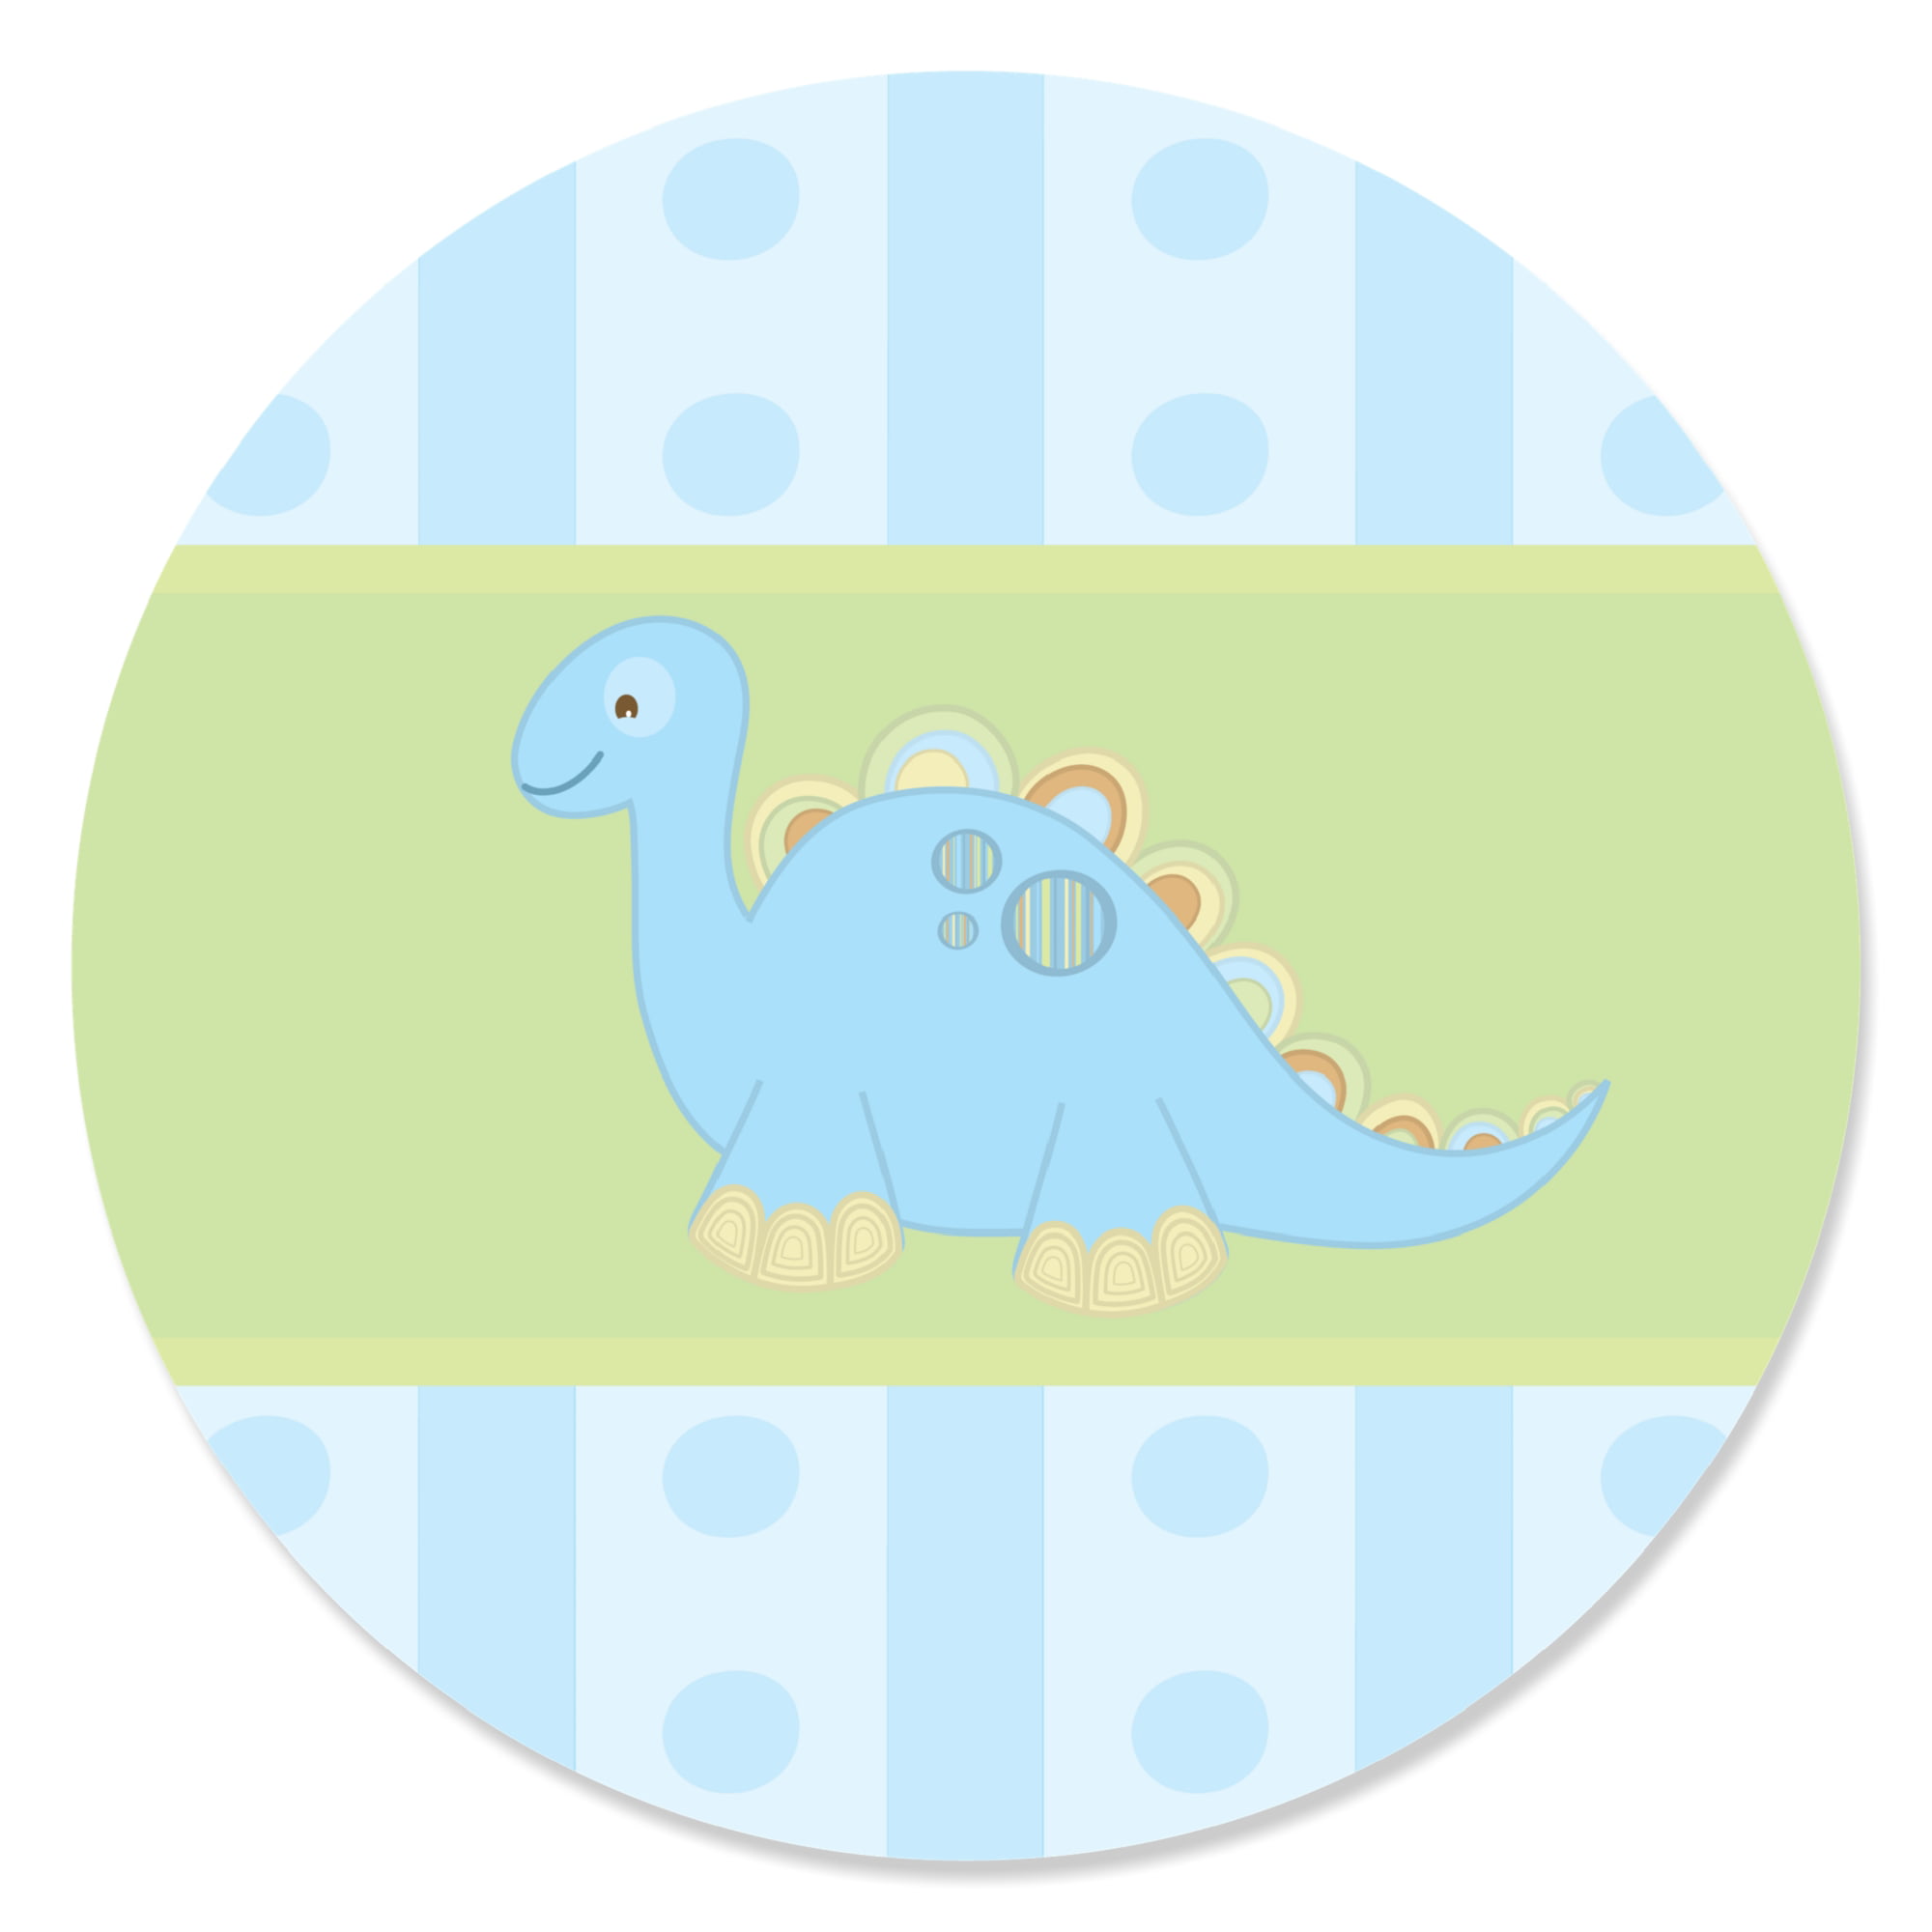 PERSONALISED GLOSS LITTLE DINOSAUR EGG BIRTHDAY PARTY STICKERS SWEET CONE LABELS 